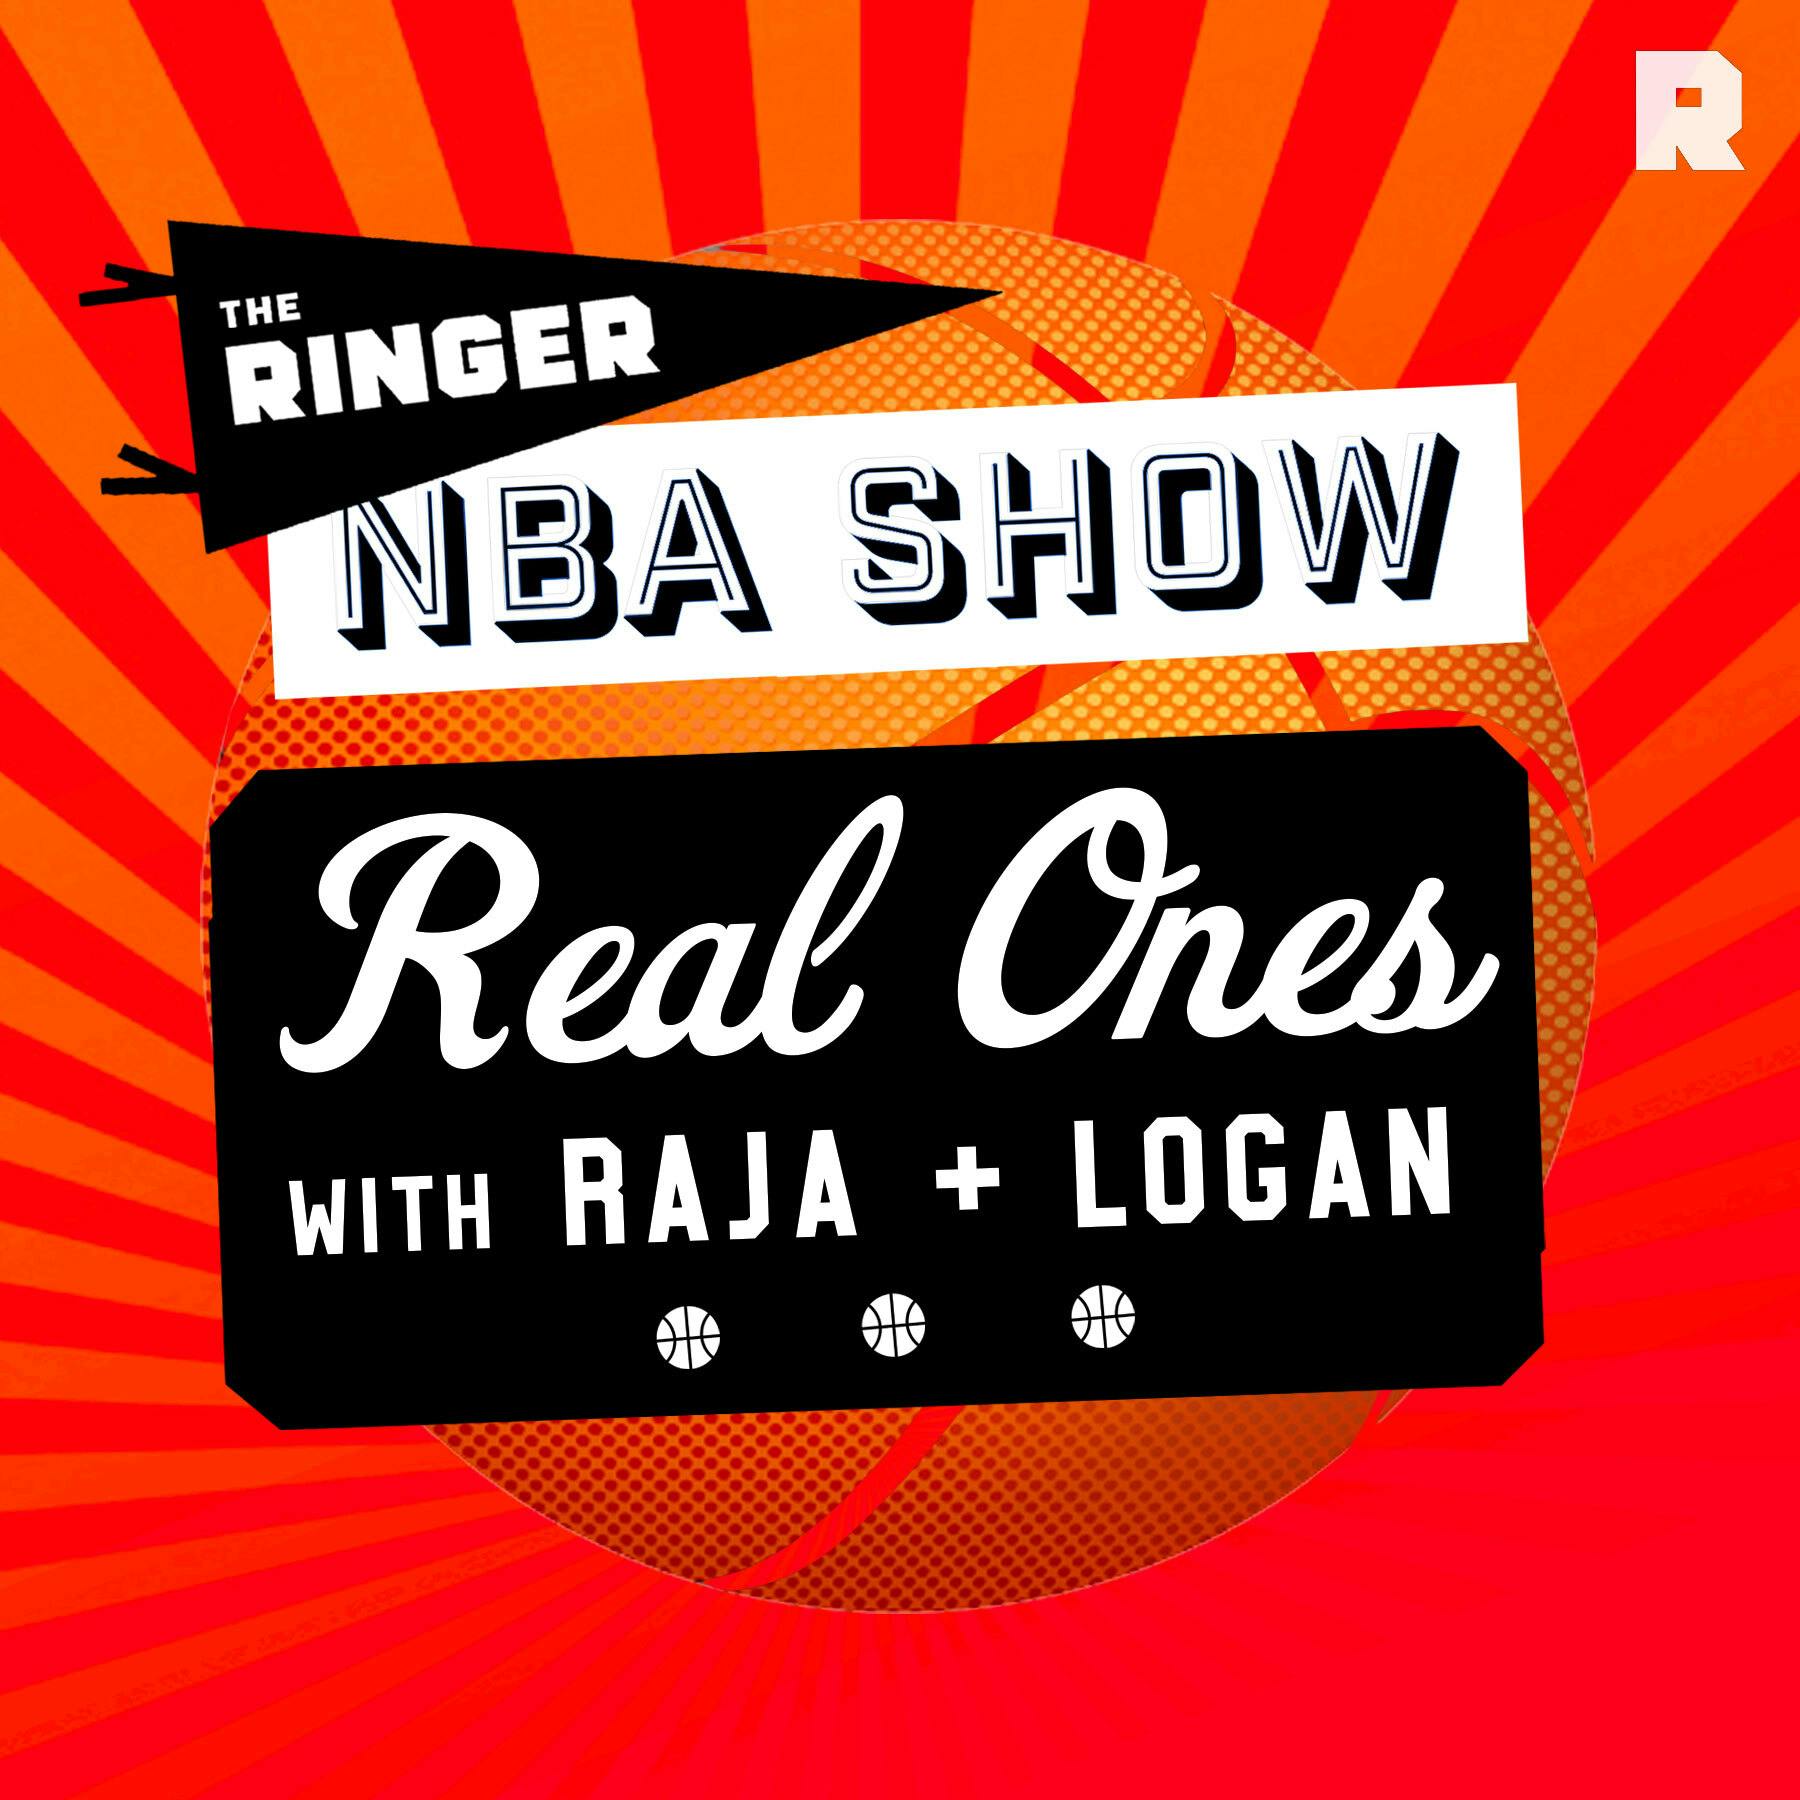 Howard Beck on ‘Real Ones,’ Celtics Taking Game 2 of the Finals, and MVP Predictions. Plus, Live Updates on Dan Hurley’s $70 Million Offer From the Lakers. | Real Ones